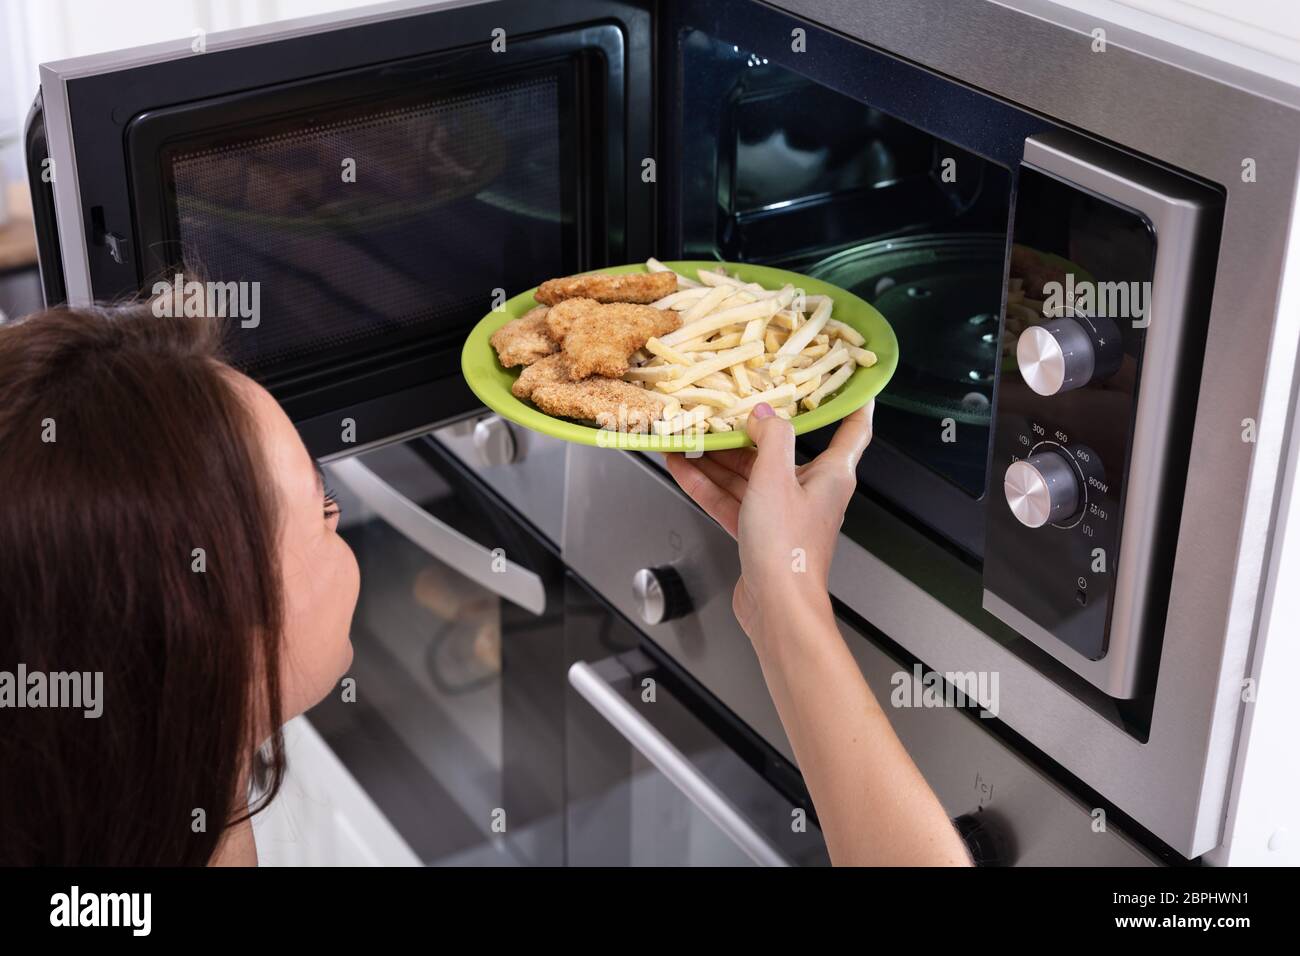 Close-up Of A Person Heating Food In Microwave Oven Stock Photo - Alamy